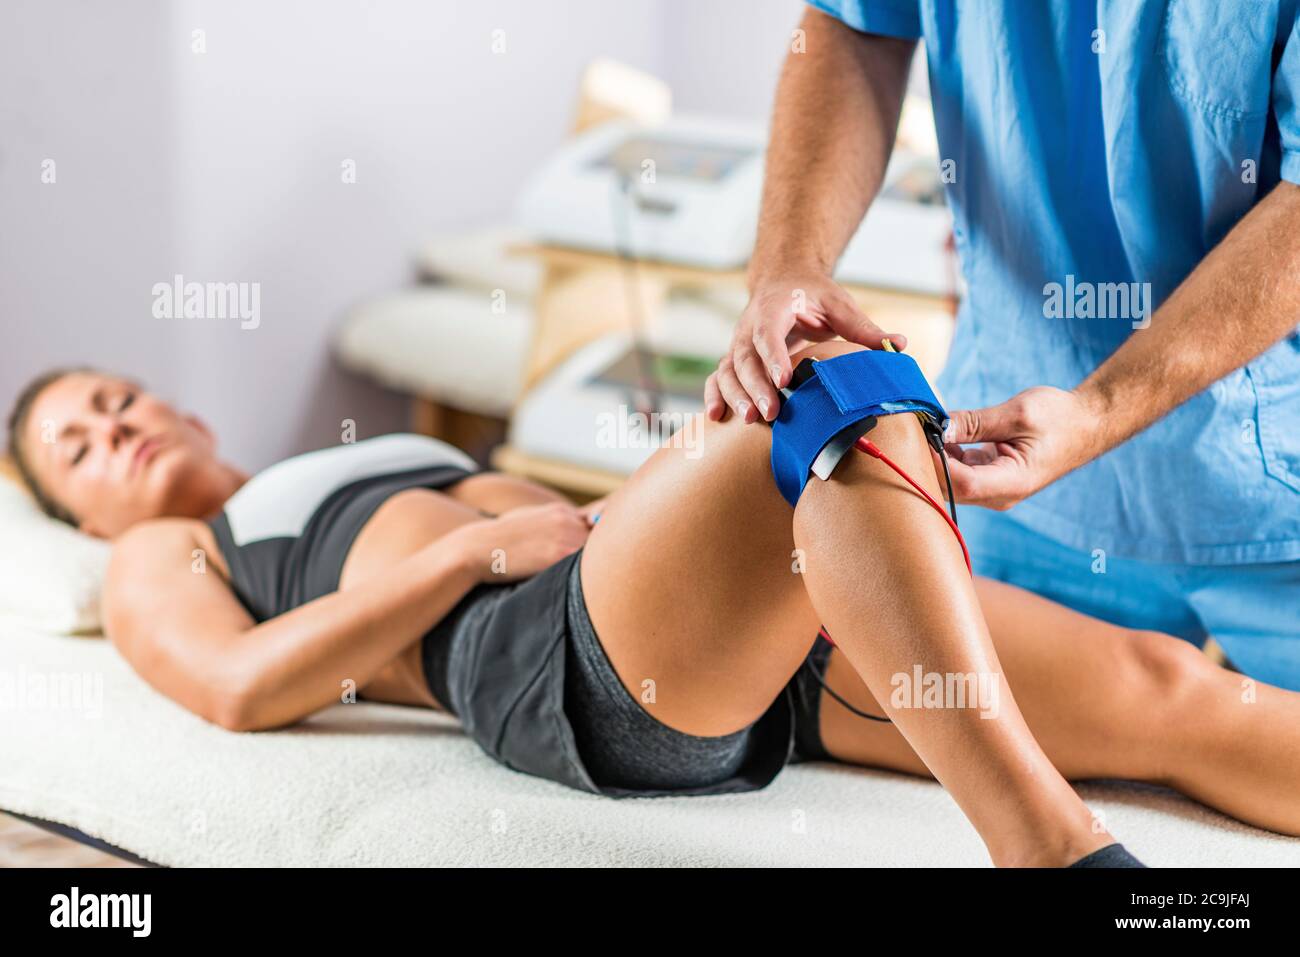 Muscle Stimulator Device With Electrodes Applied To Quadriceps By A  Professional Physiotherapist Stock Photo - Download Image Now - iStock